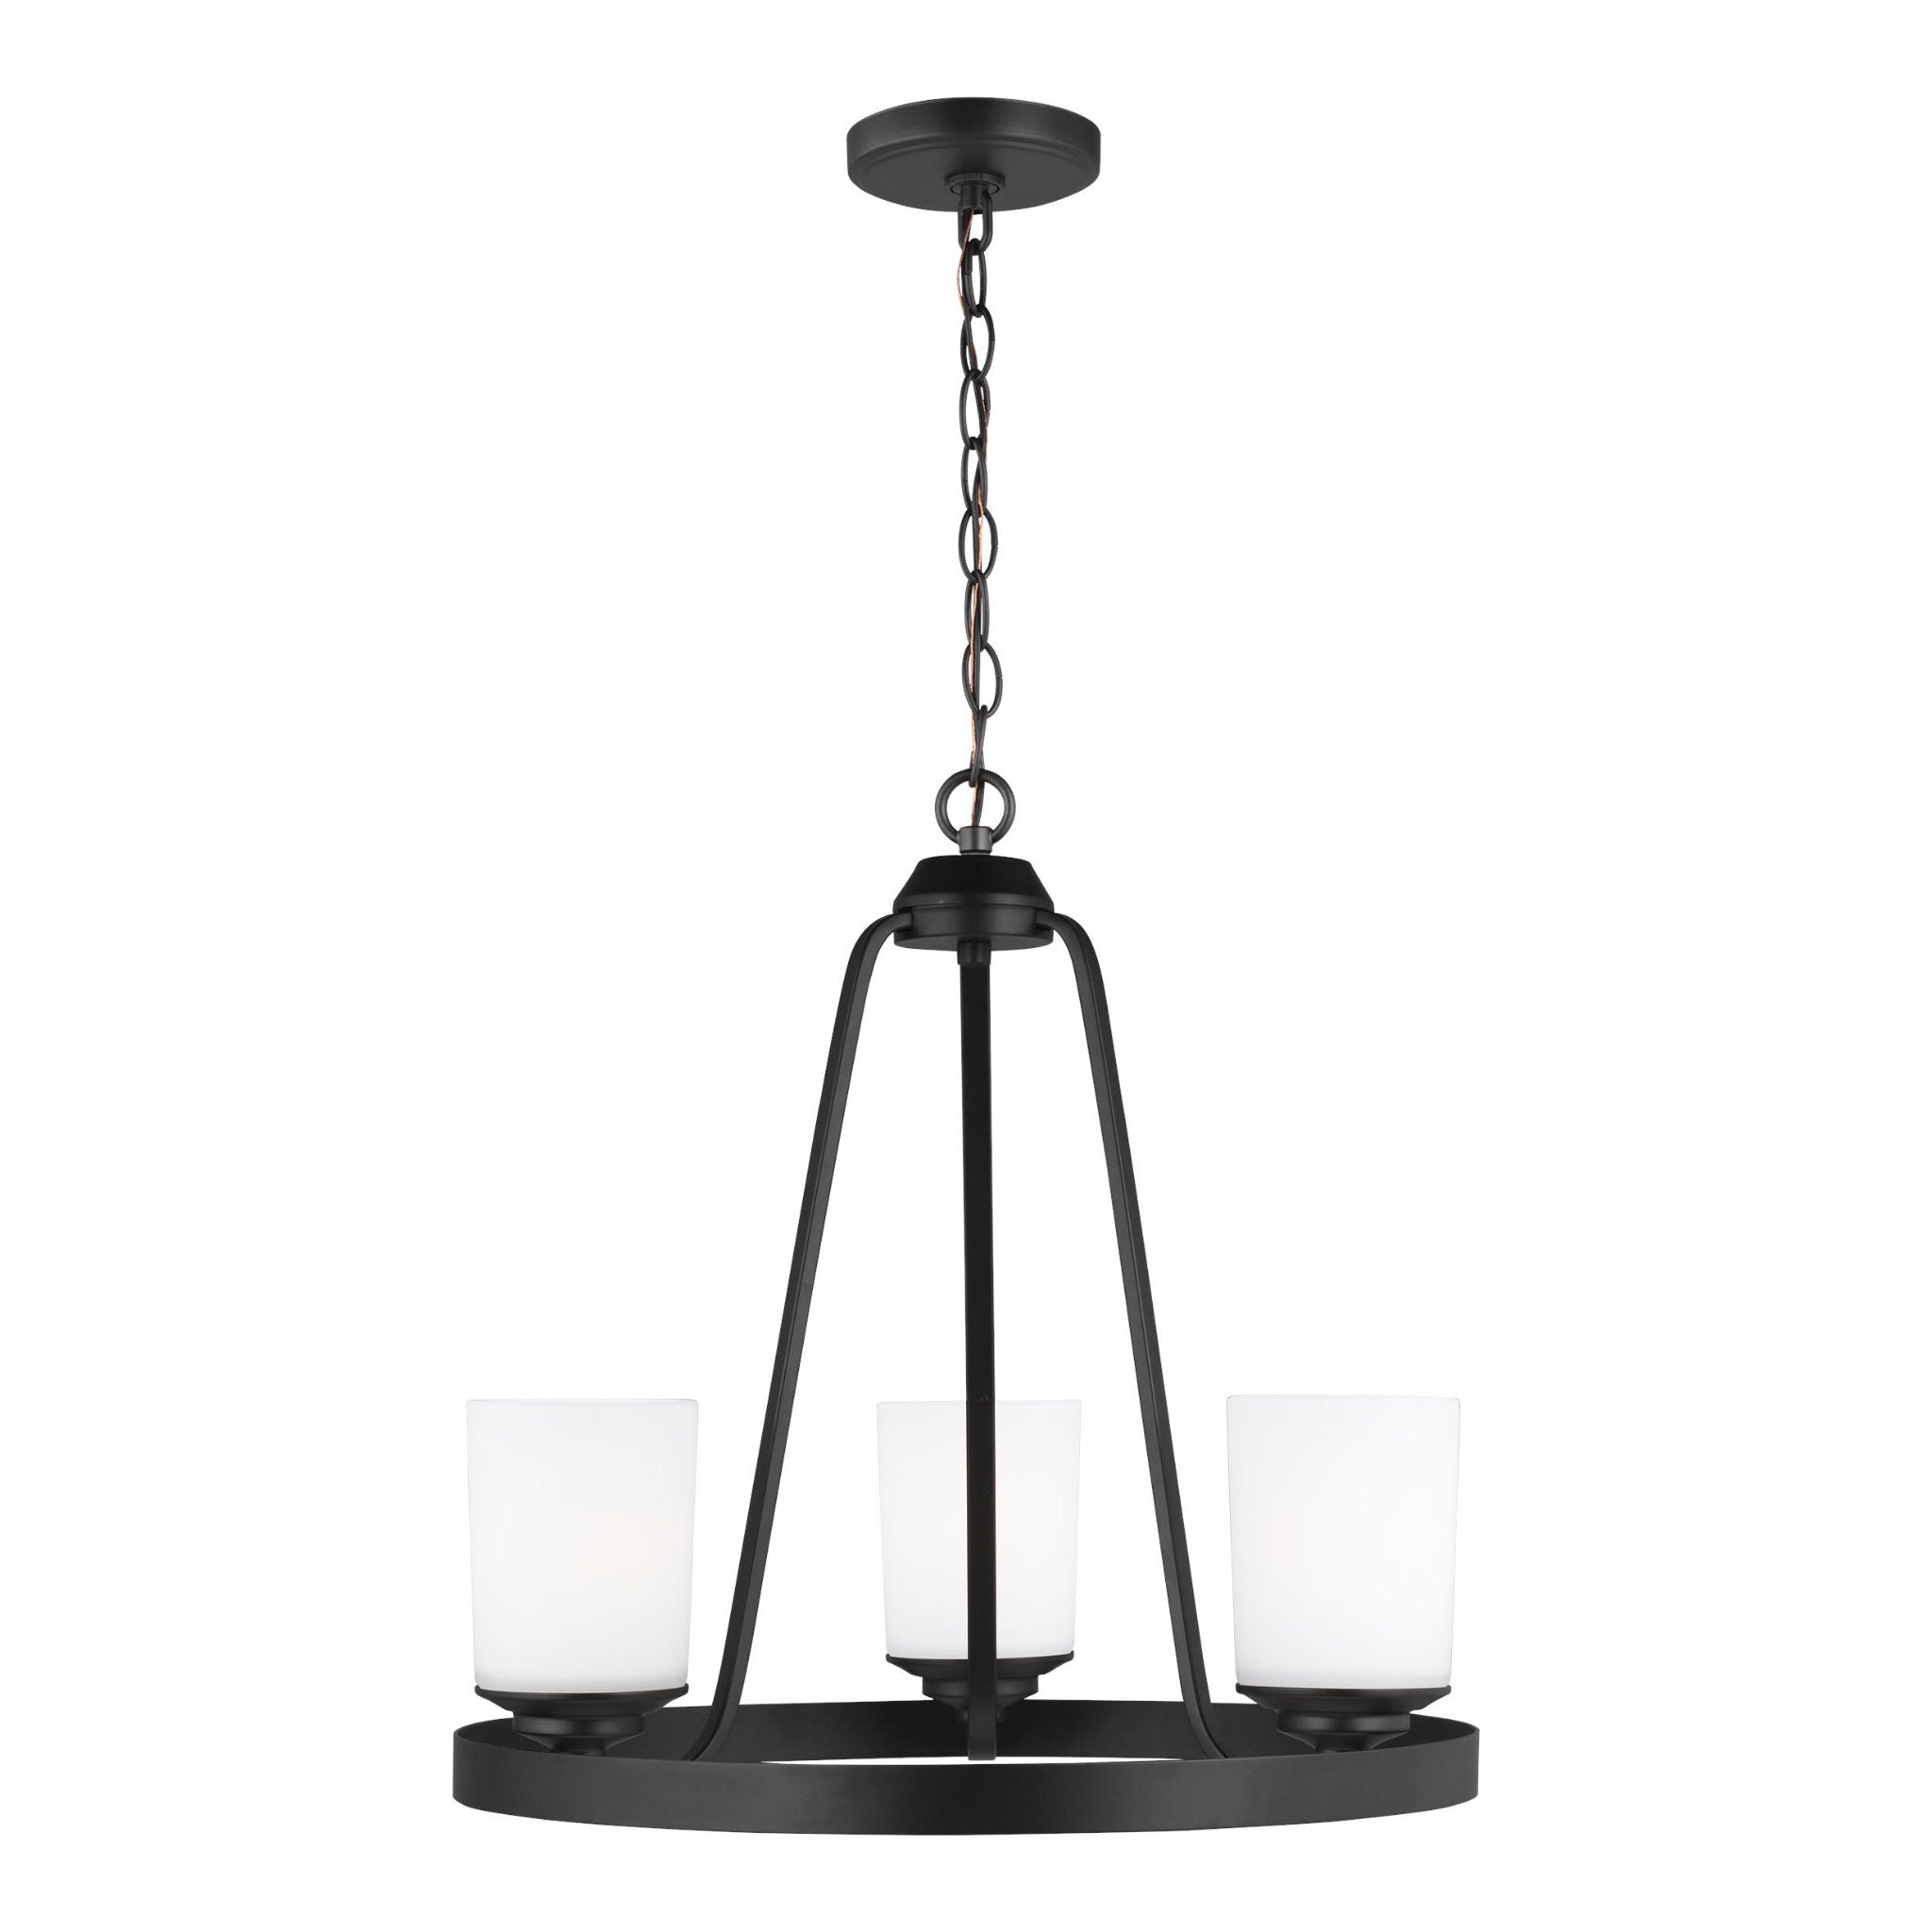 Kemal Three Light Chandelier Transitional 19" Height Steel Round Etched / White Inside Shade in Midnight Black